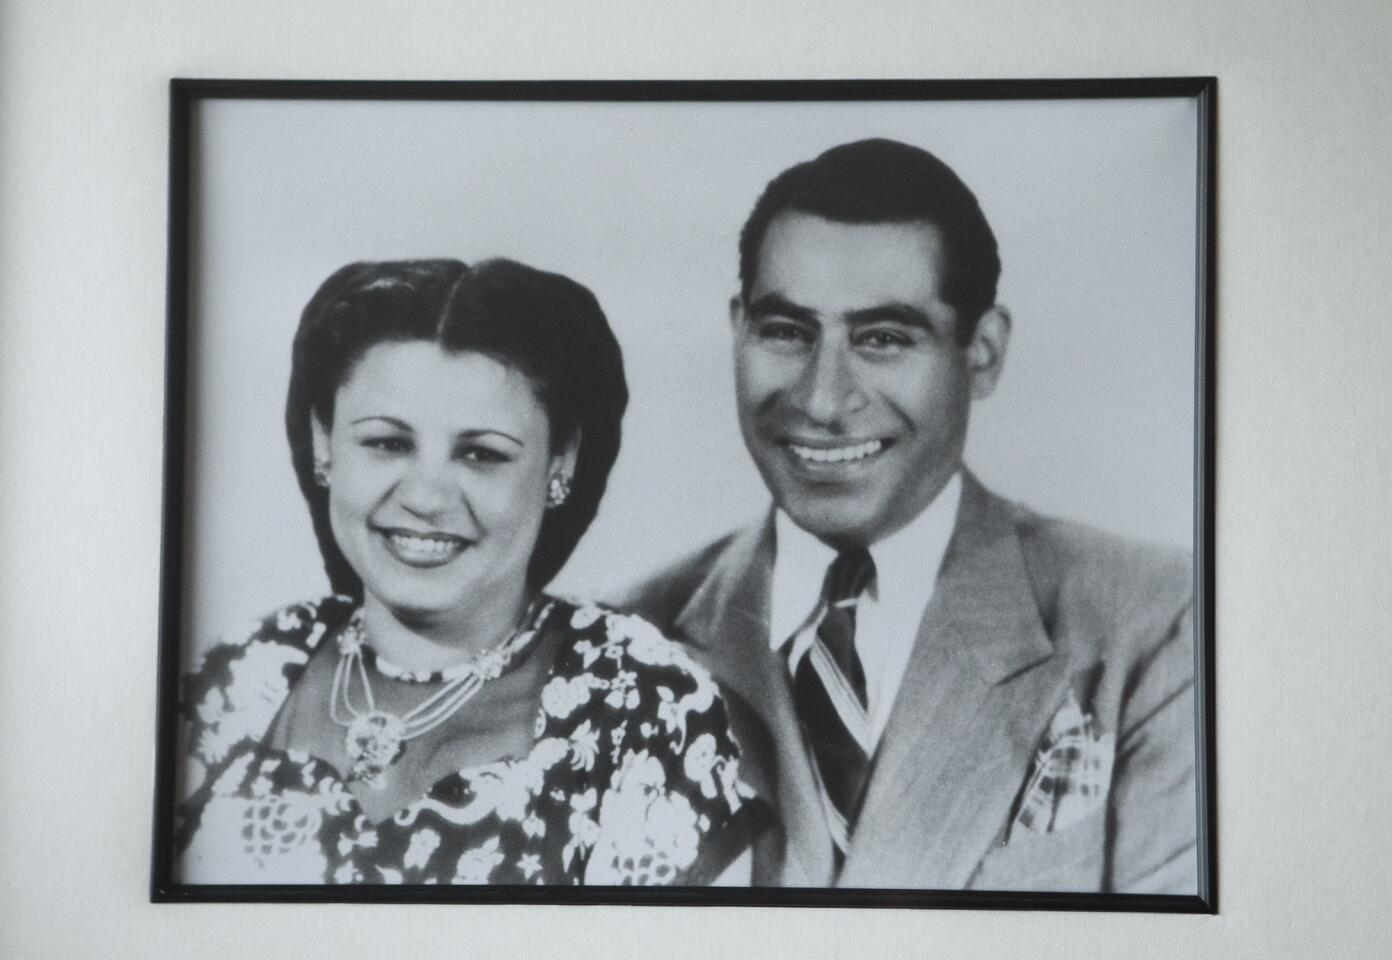 A portrait of Felicitas and Gonzalo Mendez, who brought the court case Mendez vs. Westminster that desegregated California schools.